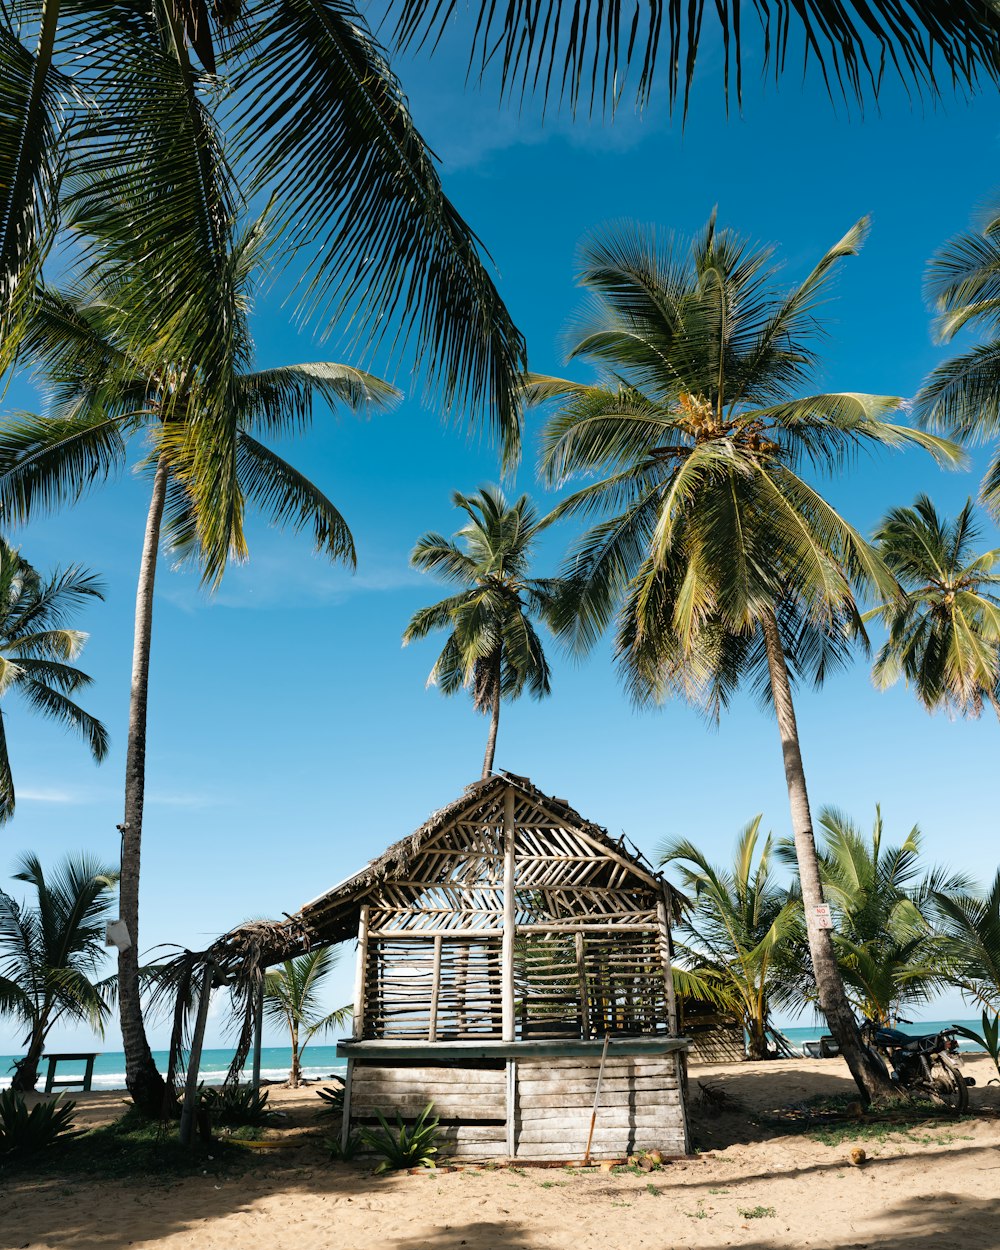 a hut on the beach surrounded by palm trees